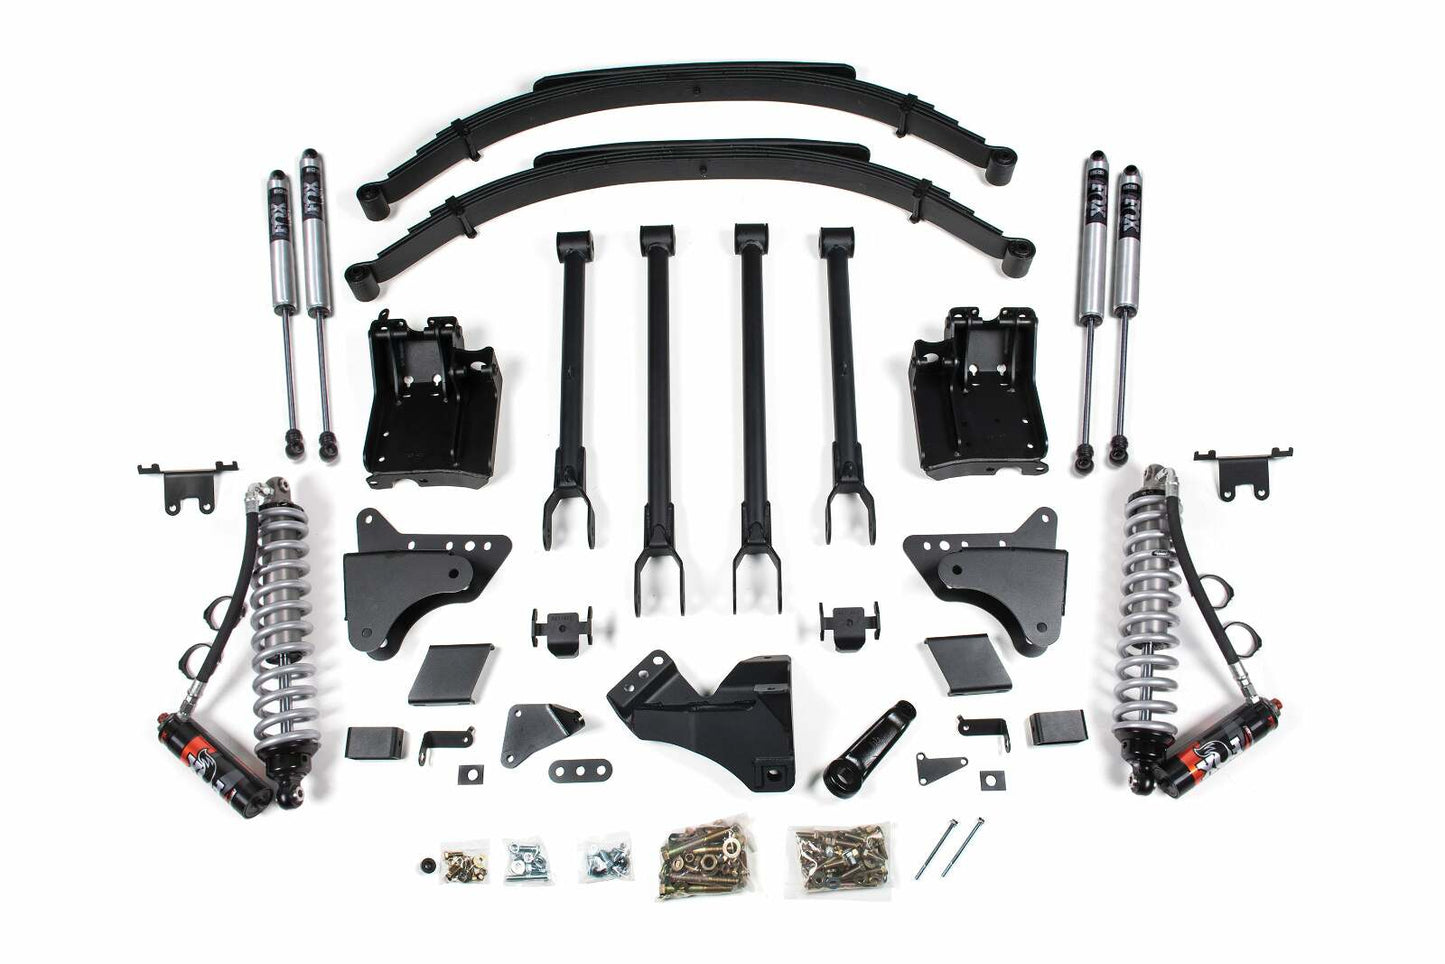 2011-2016 Ford F250/F350 4wd 8" 4-Link Suspension Lift Kit, 7" rear, Spring, Diesel - Fox 2.5 PES C/O Front, Fox 2.0 IFP PS Aux Front, Fox 2.0 IFP PS Rear